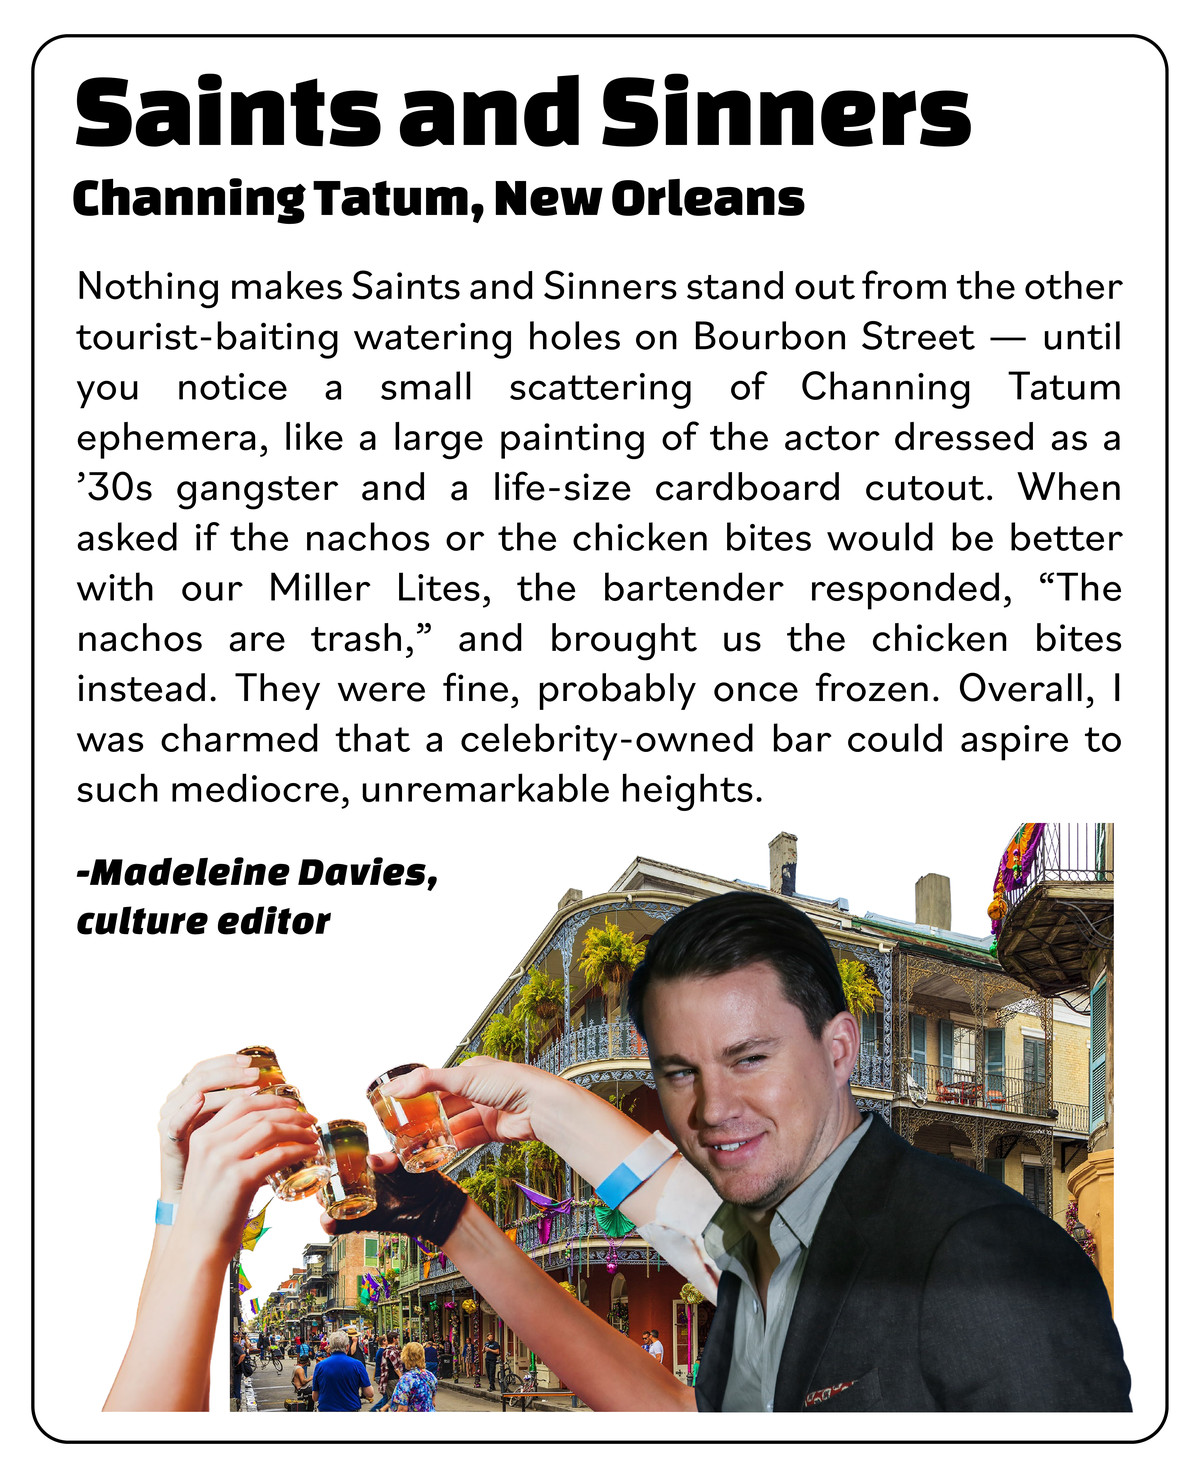 Sidebar review of Channing Tatum’s Saints and Sinners, NOLA: “Nothing makes this bar stand out from the other tourist-baiting watering holes on Bourbon Street, until you notice a scattering of Tatum ephemera, like a painting of the actor dressed as a ‘30s gangster. When asked if nachos or chicken bites would be better with our Miller Lites, the bartender responded, ‘Nachos are trash,’ and brought us the chicken. It was fine, probably once frozen. Overall, a charmingly mediocre experience.”